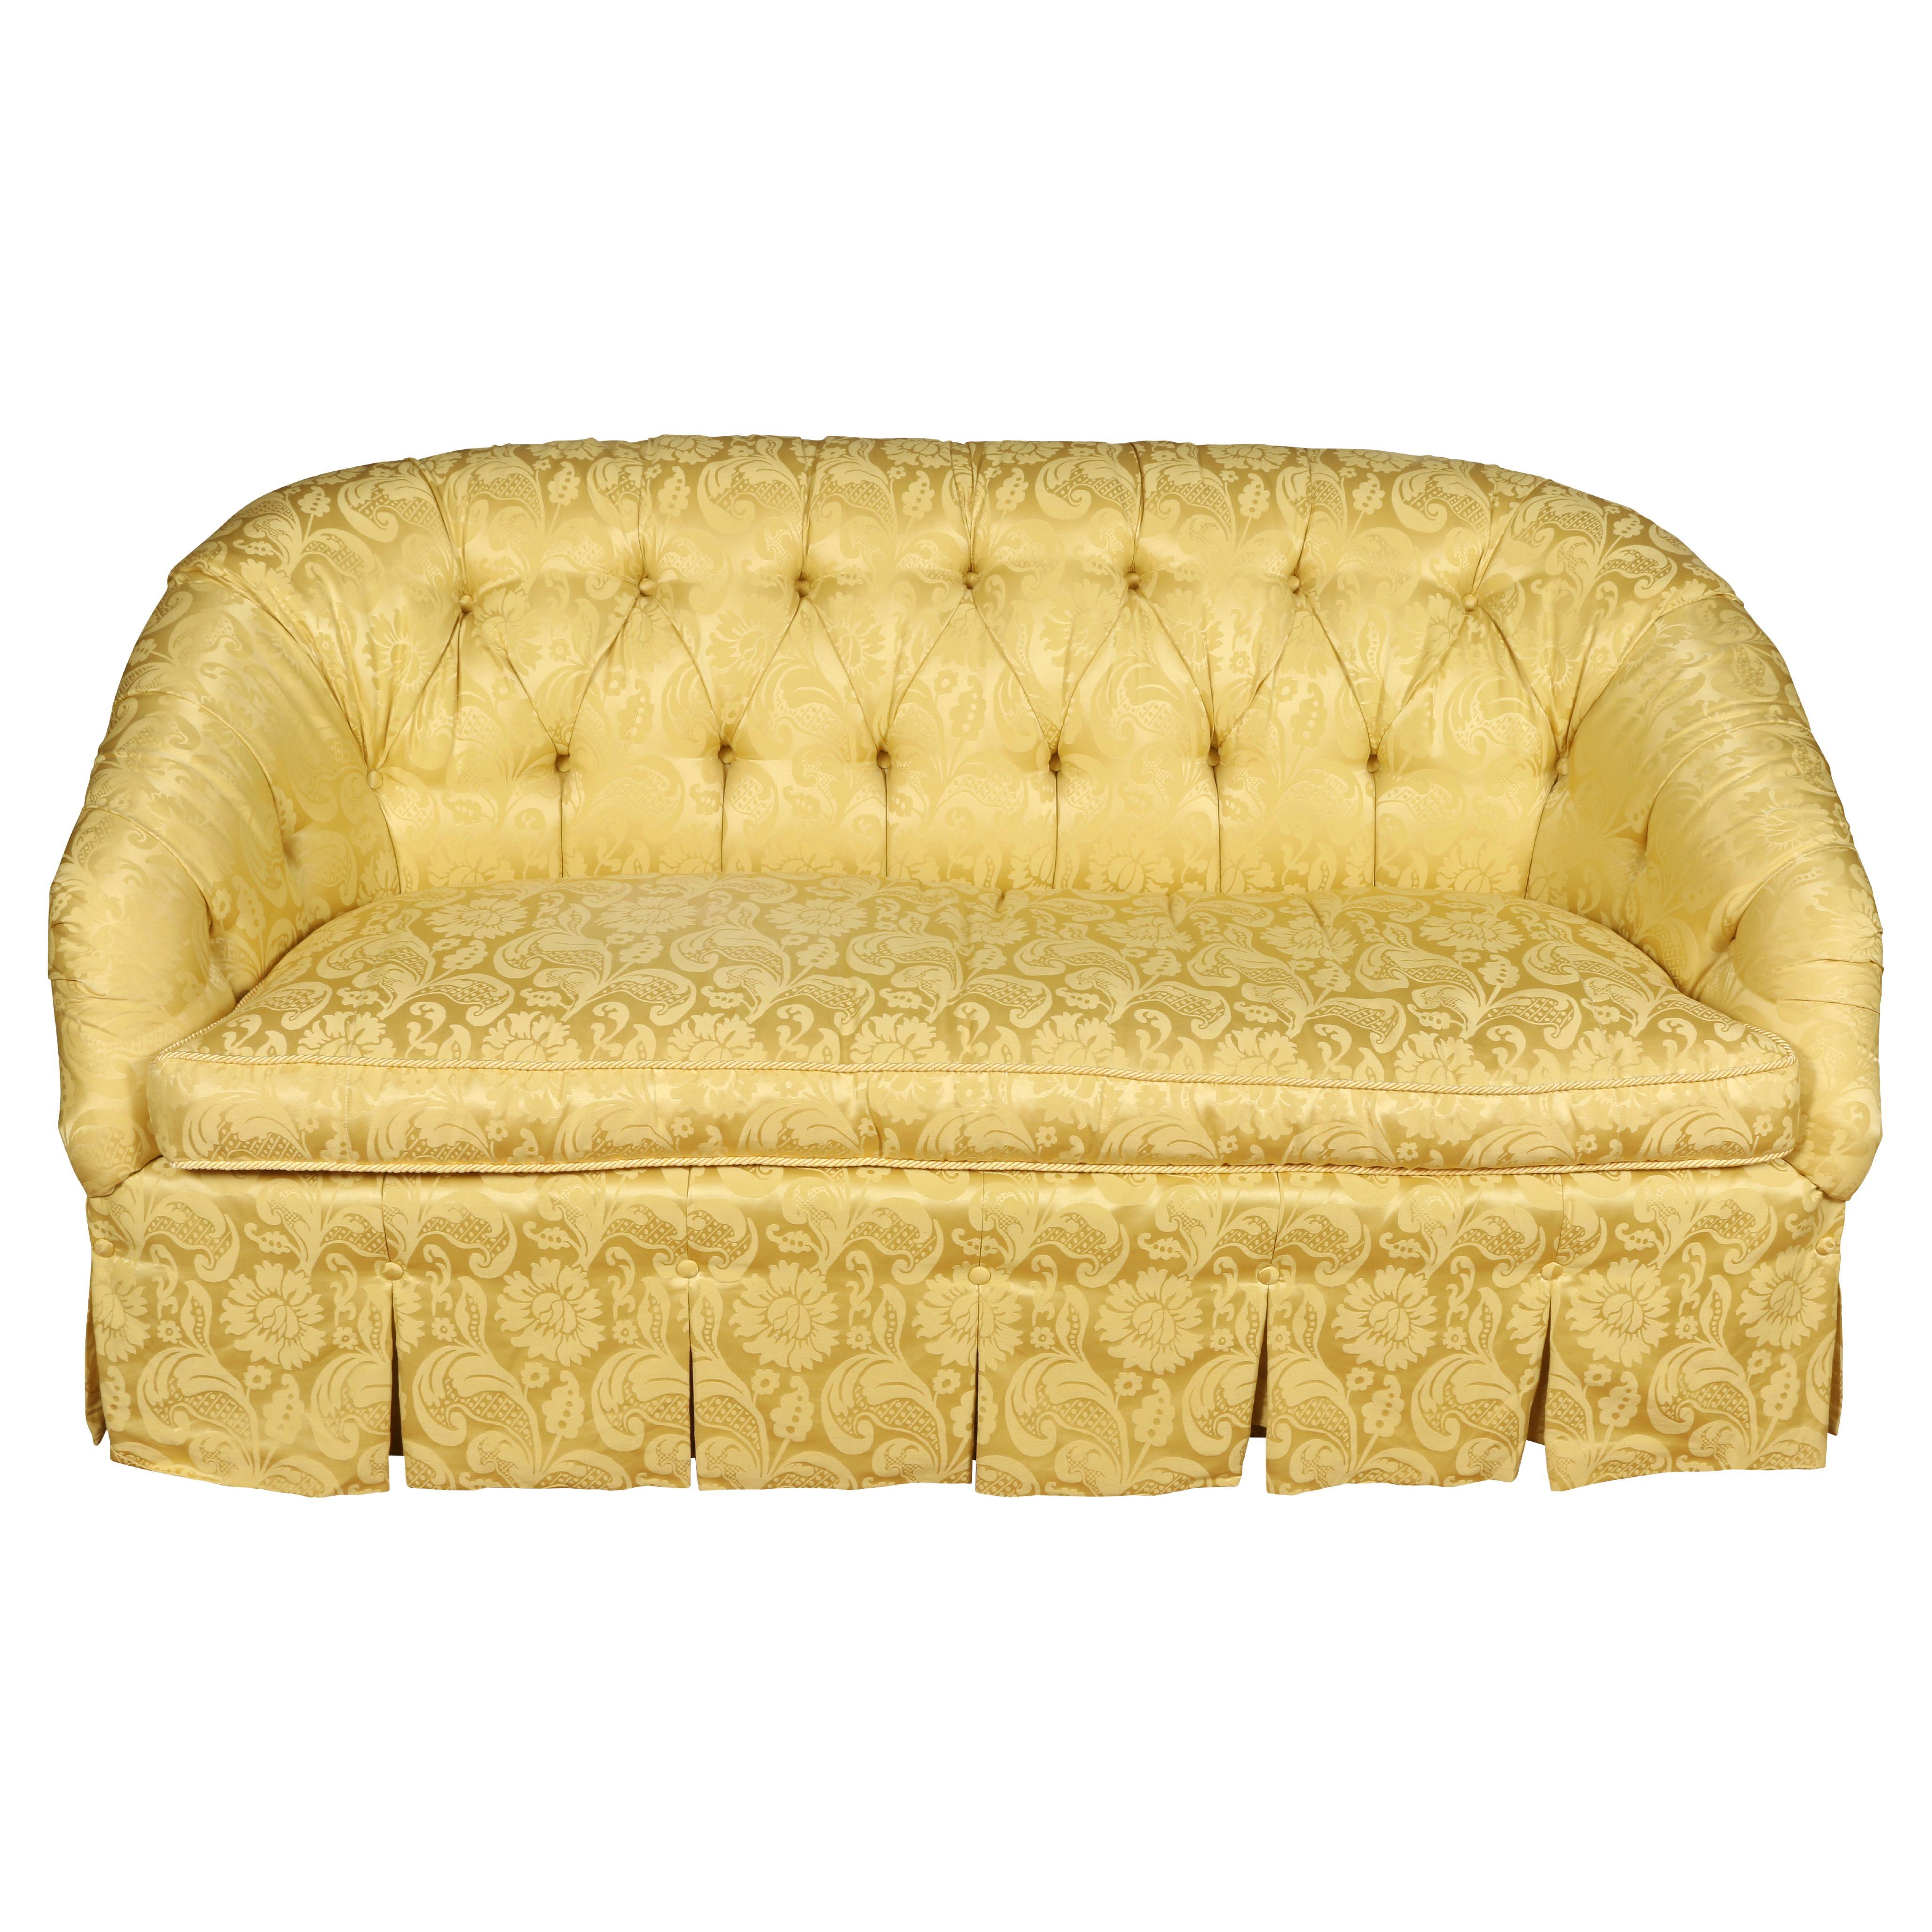 A Tufted Loveseat For Sale